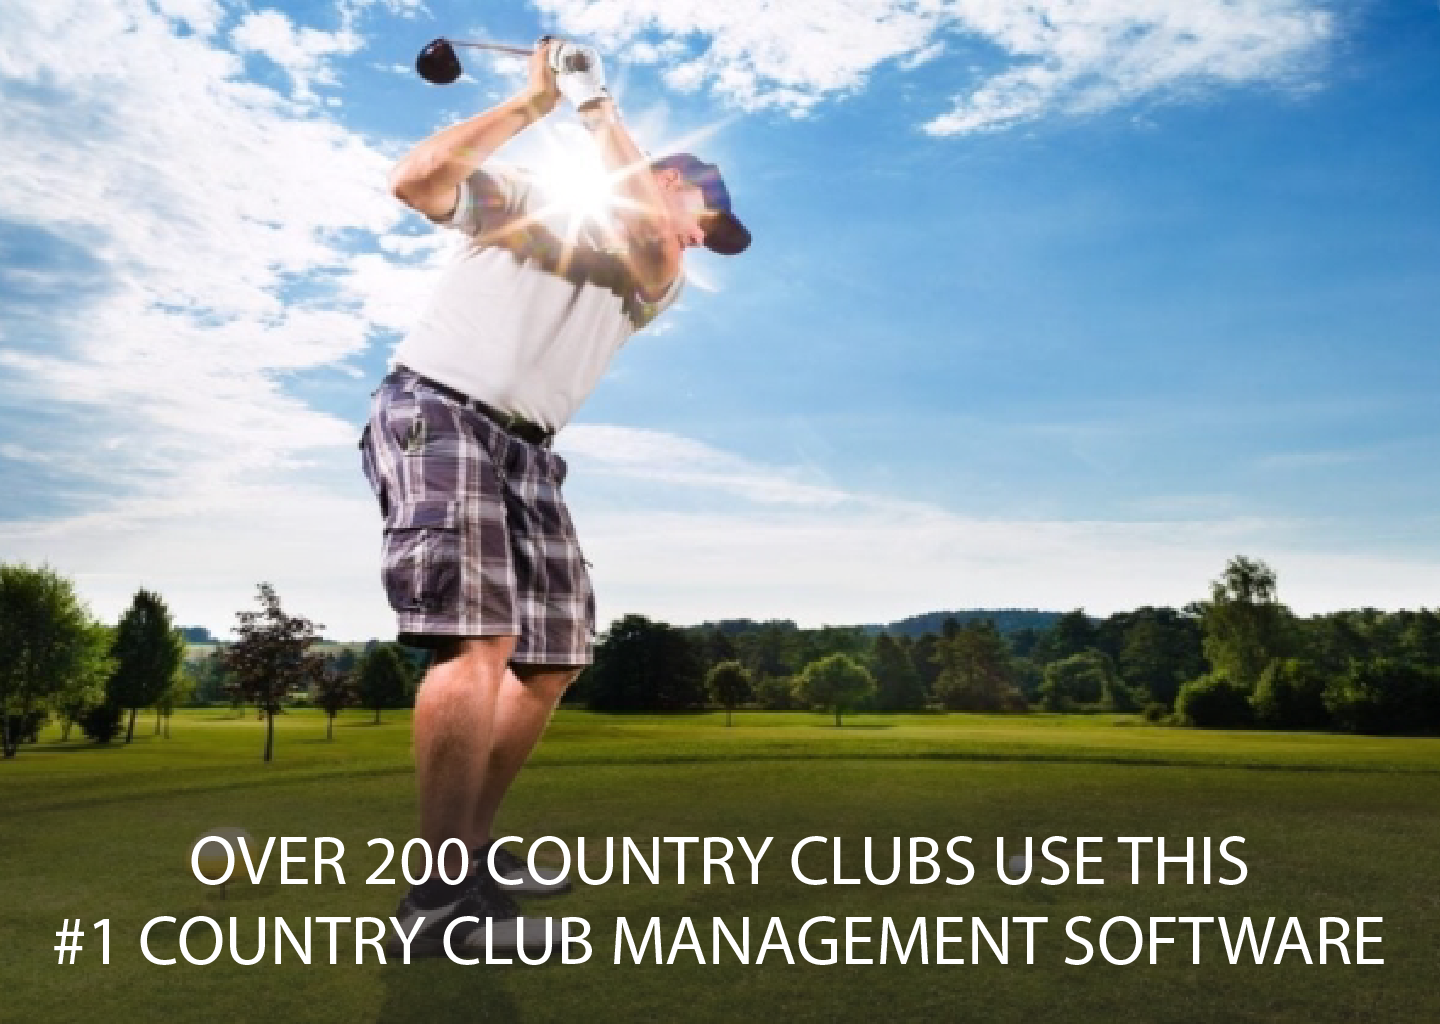 Over 200 Country Clubs Use This #1 Country Club Management Software